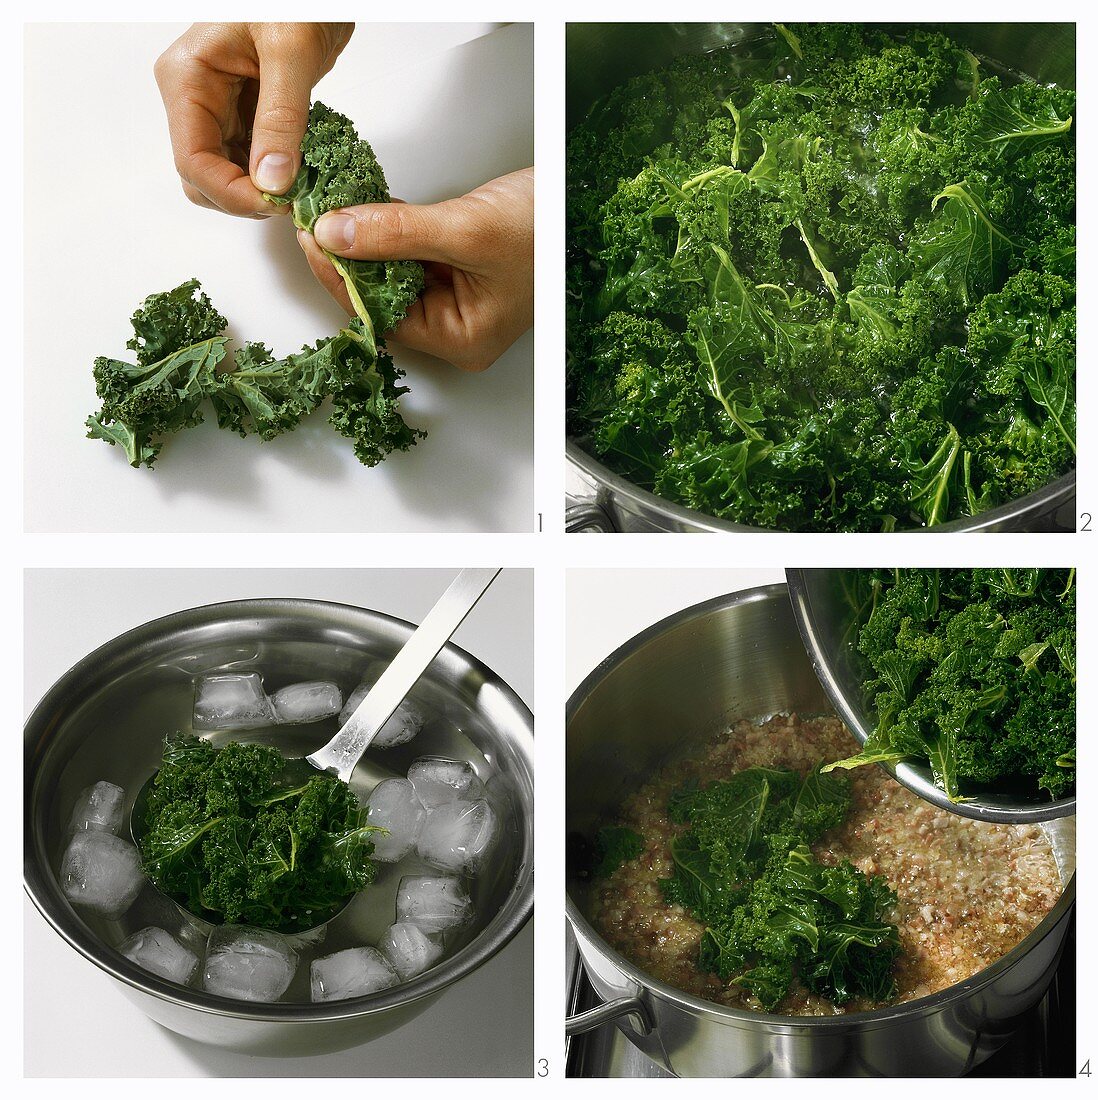 Blanching kale and putting it into a pan